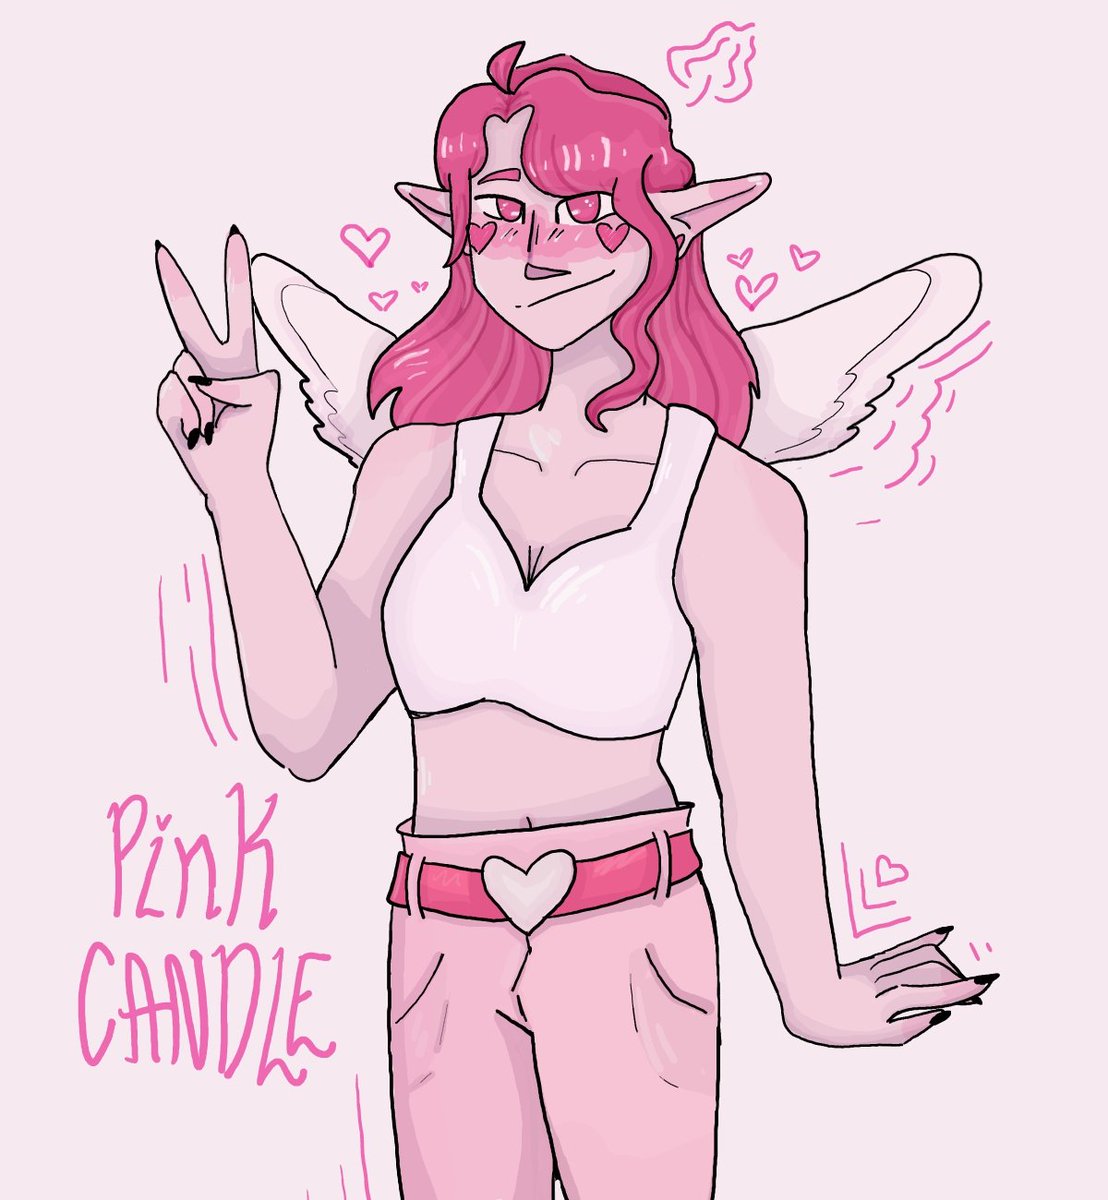 Art trade I did with @crrowpng 

Pink candle my beloved 😤💖